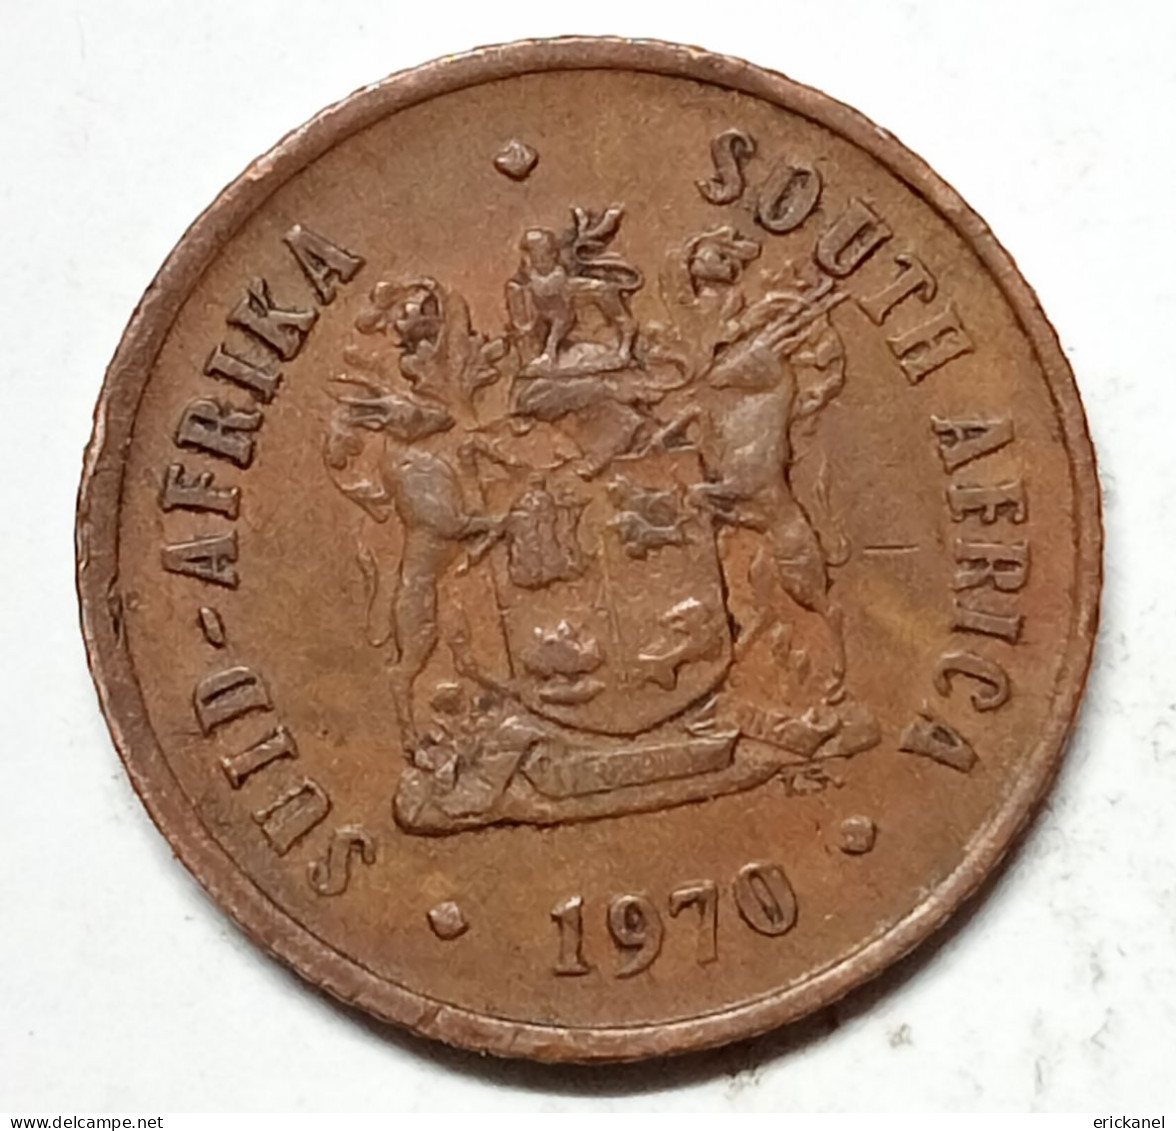 SOUTH AFRICA 1970 1 CENT - Sud Africa